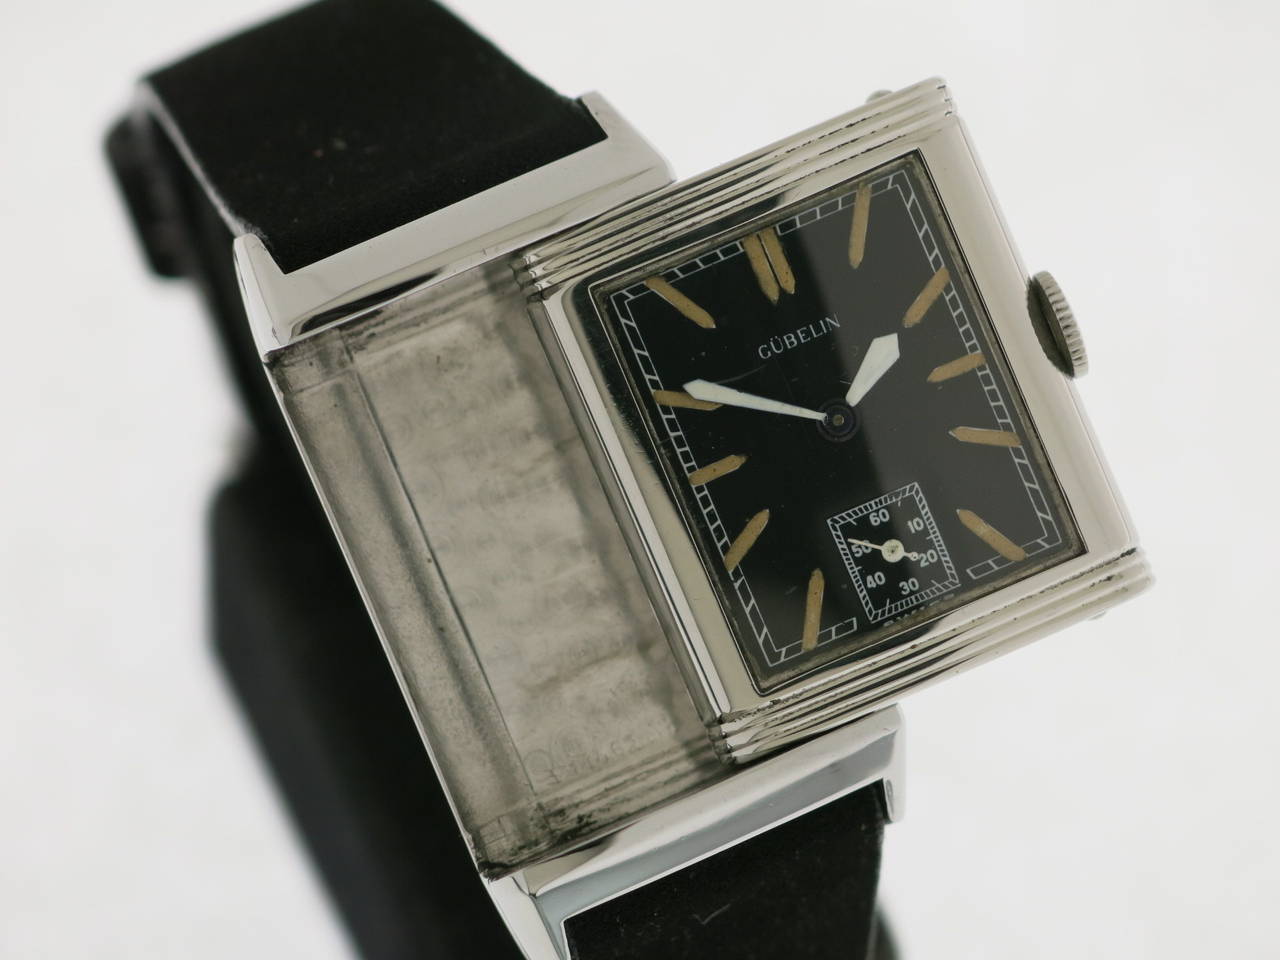 An amazing stainless steel Jaeger-LeCoultre wristwatch, with a beautiful black dial, retailed by Gubelin.